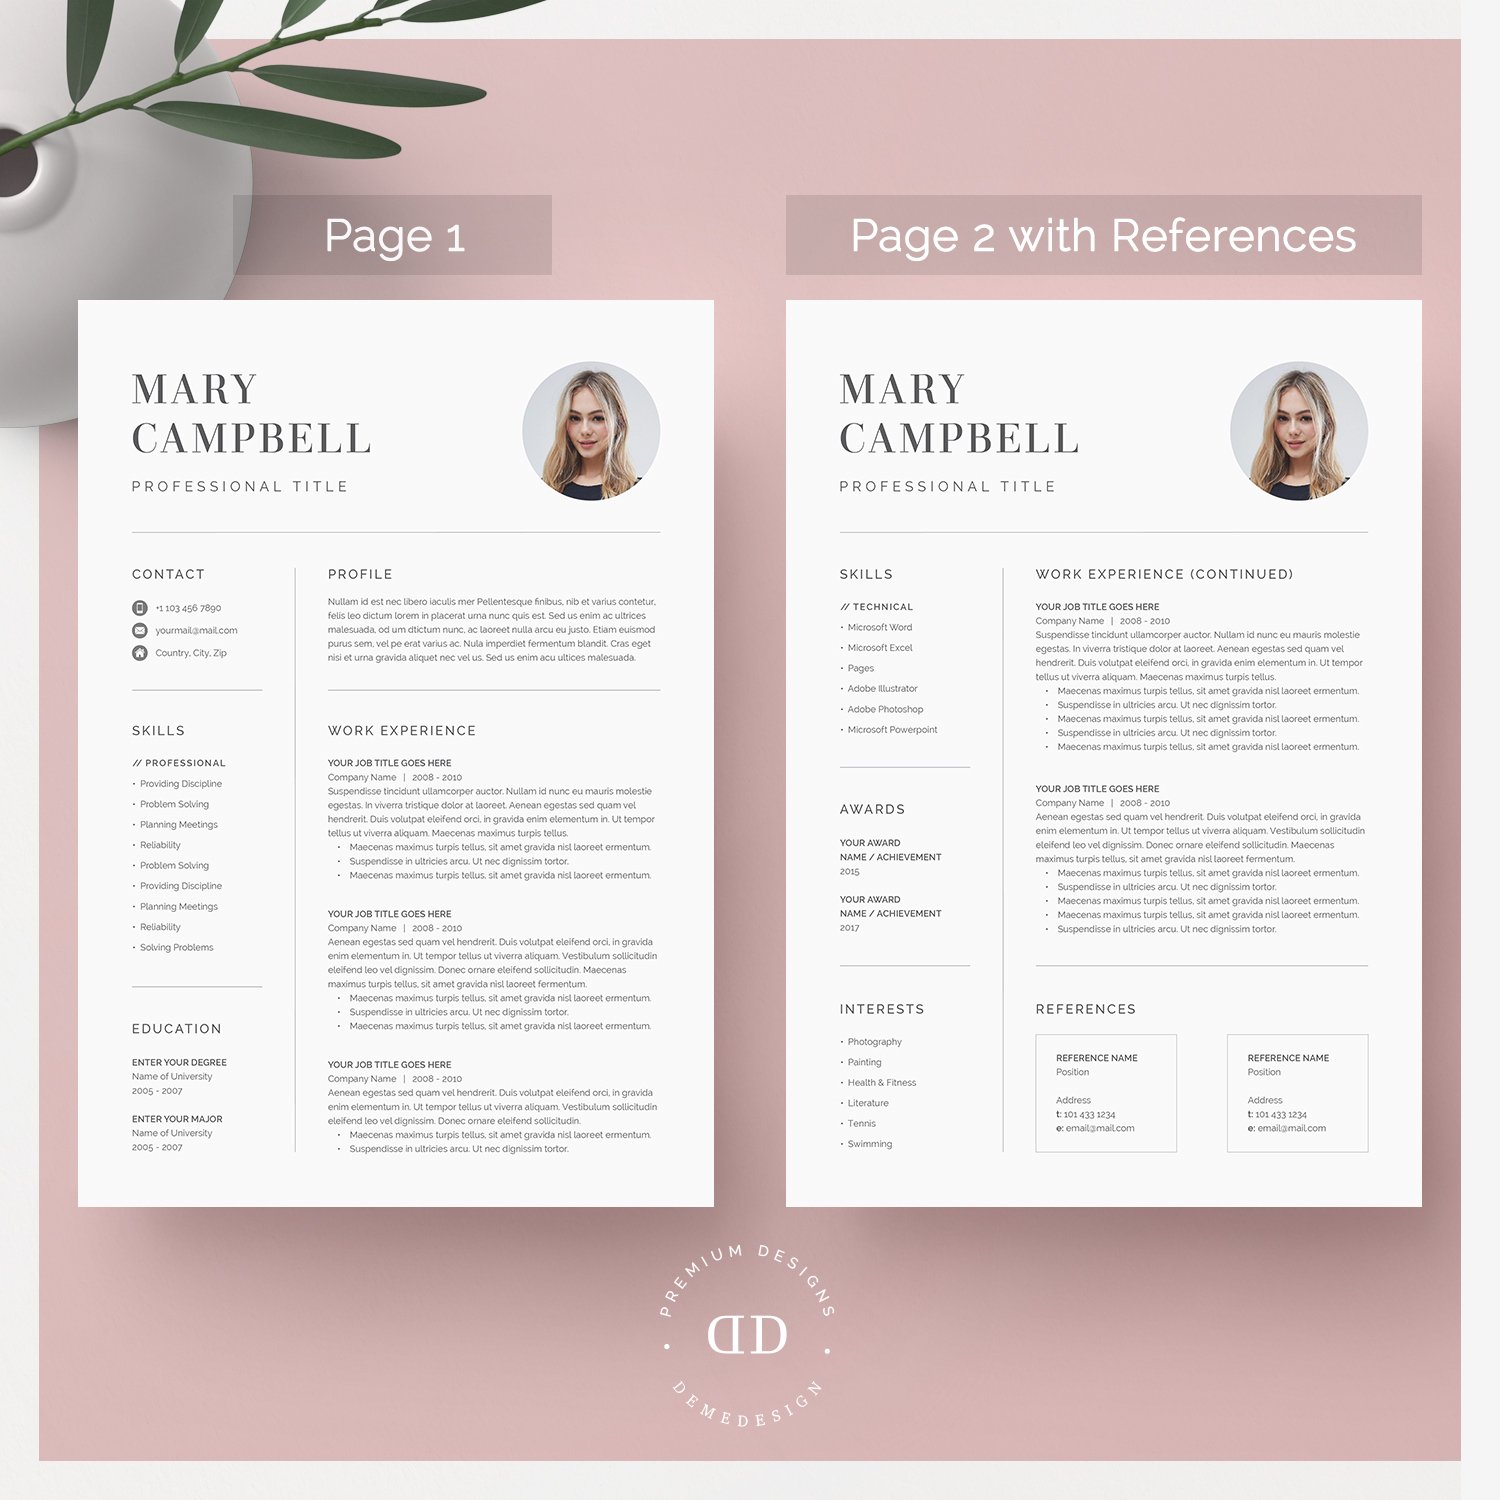 mary resume 2 pagewith references 392